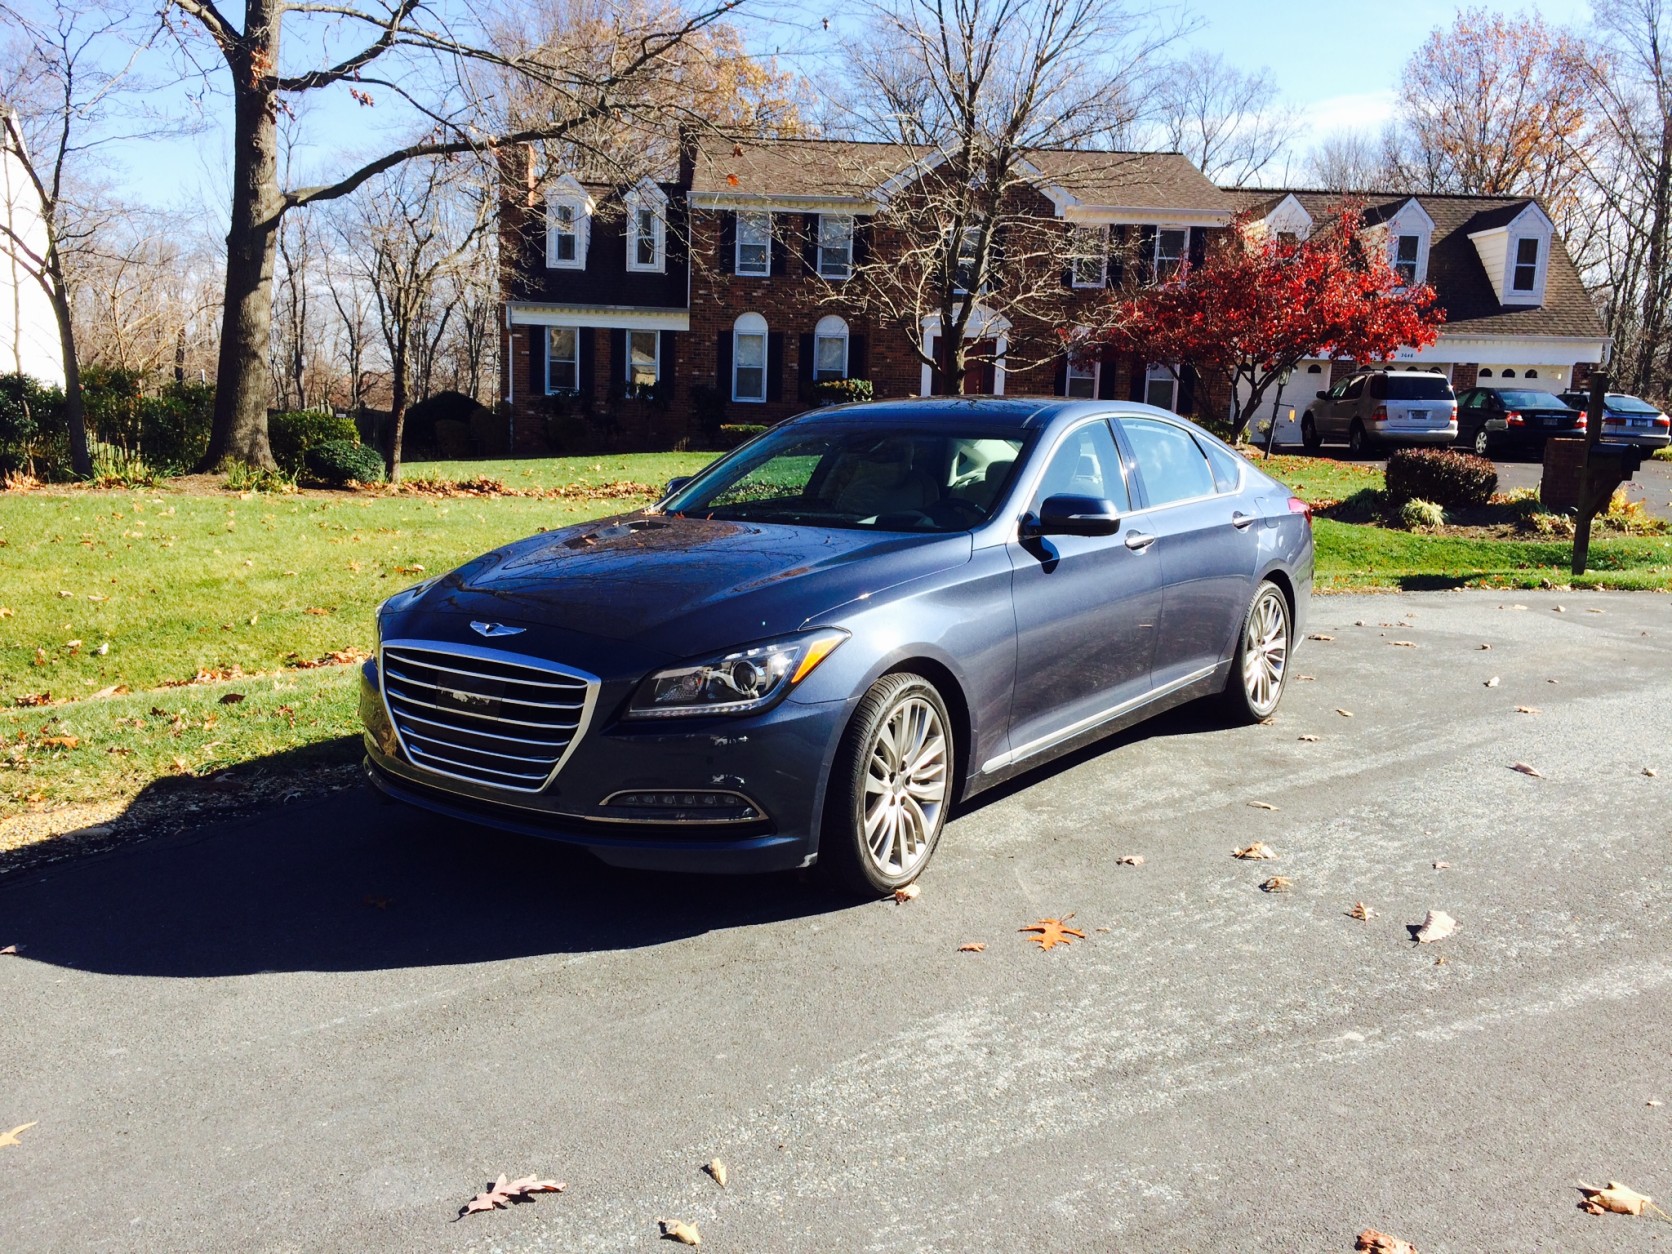 WTOP's Mike Parris spent a week with the 2015 Hyundai Genesis 5.0. What's his verdict? (WTOP/Mike Parris)